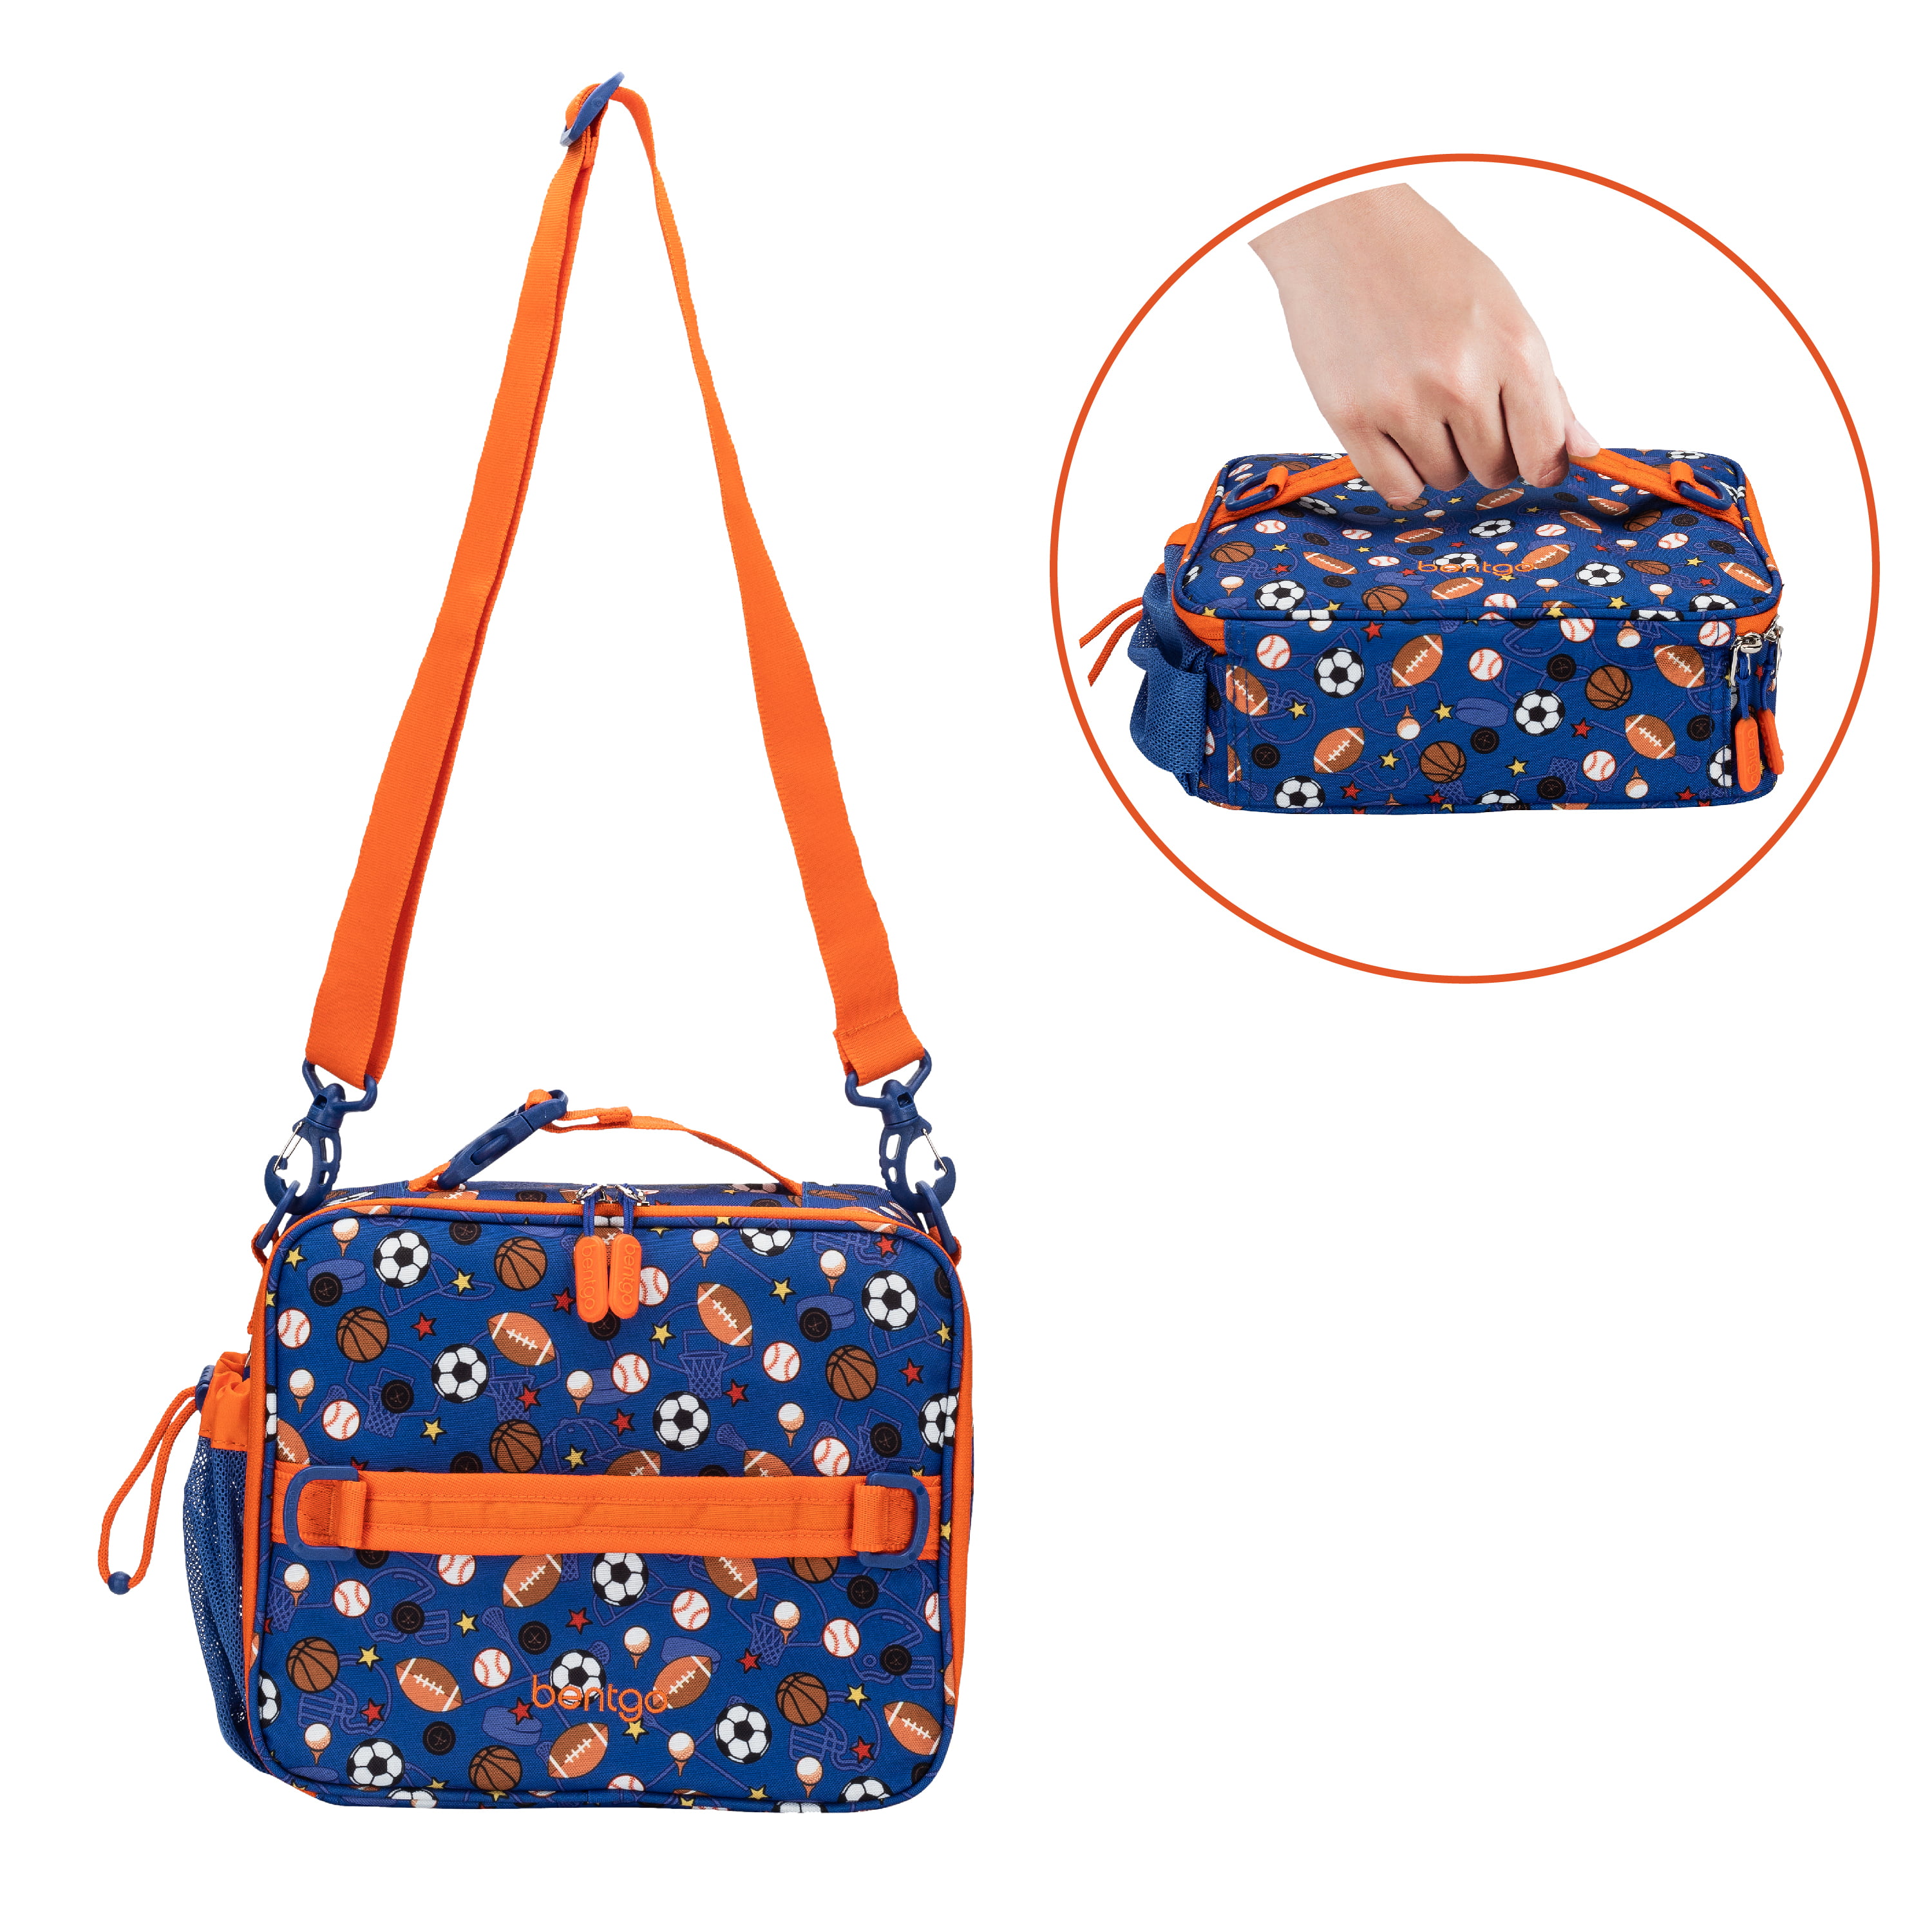 Bentgo Kids Prints Lunch Bag - Double Insulated, Durable, Water-Resistant  Fabric with Interior and Exterior Zippered Pockets and External Bottle  Holder- Ideal for Children 3+ (Construction Trucks) 